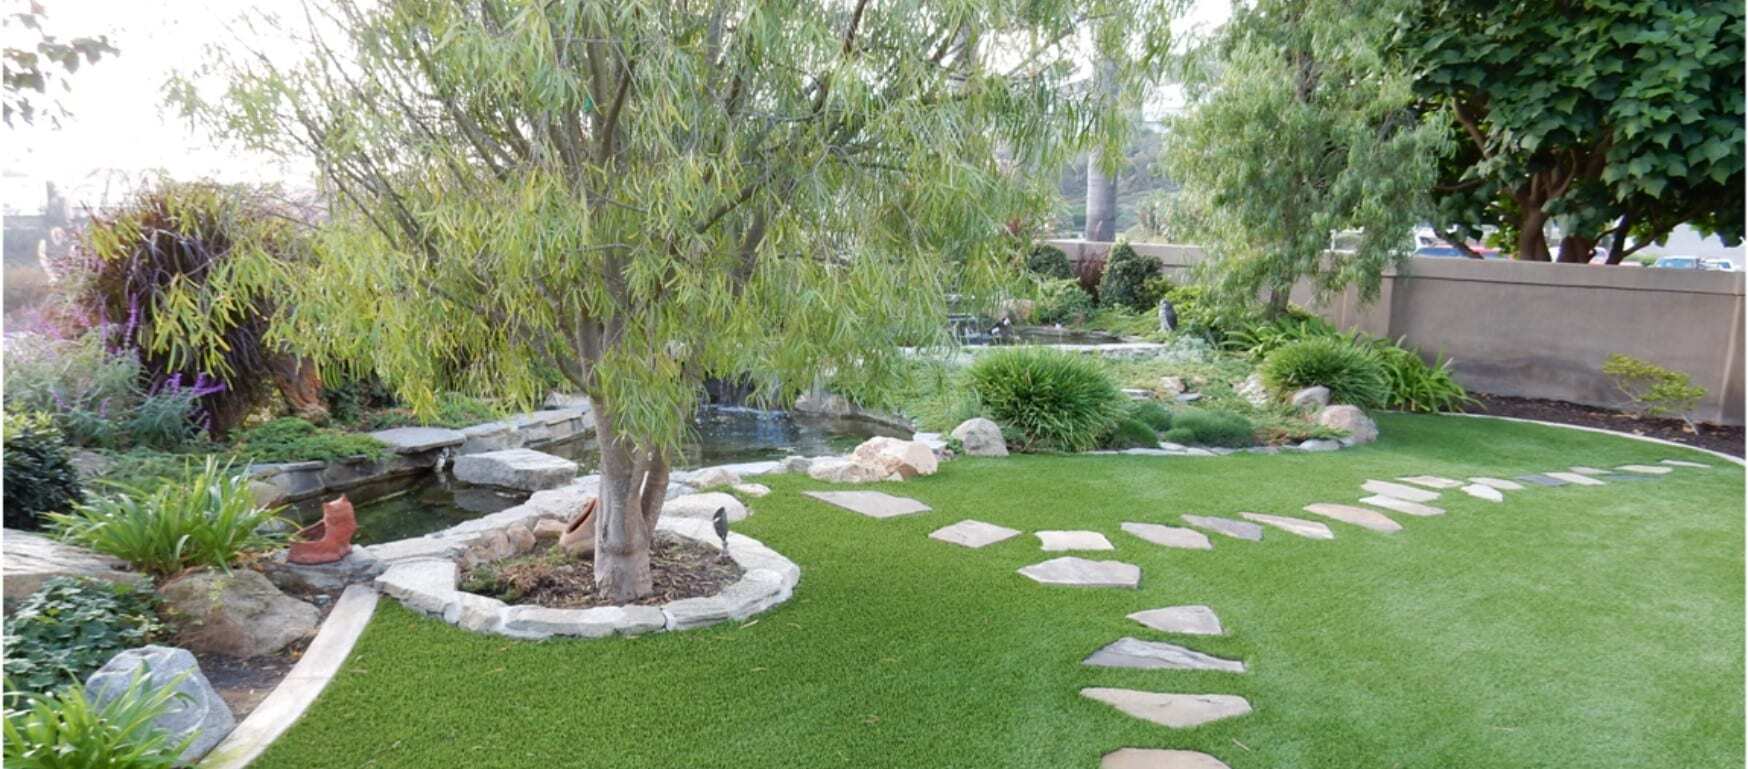 Green-R Turf Artificial Grass & Pavers - The Ultimate Landscape & Hardscape Solution